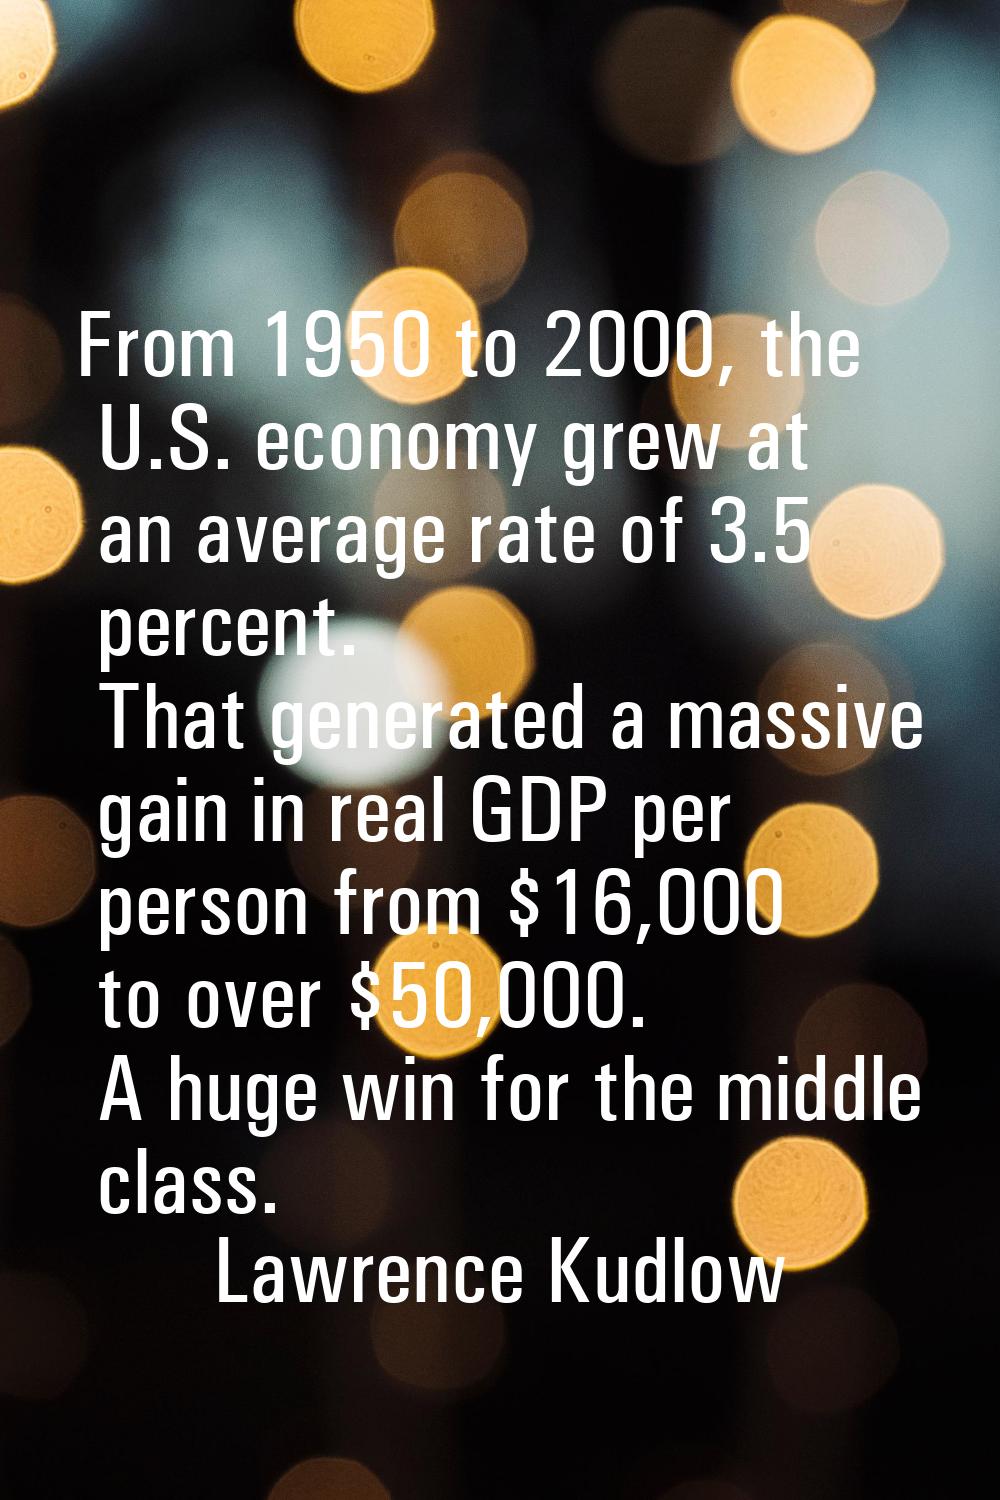 From 1950 to 2000, the U.S. economy grew at an average rate of 3.5 percent. That generated a massiv